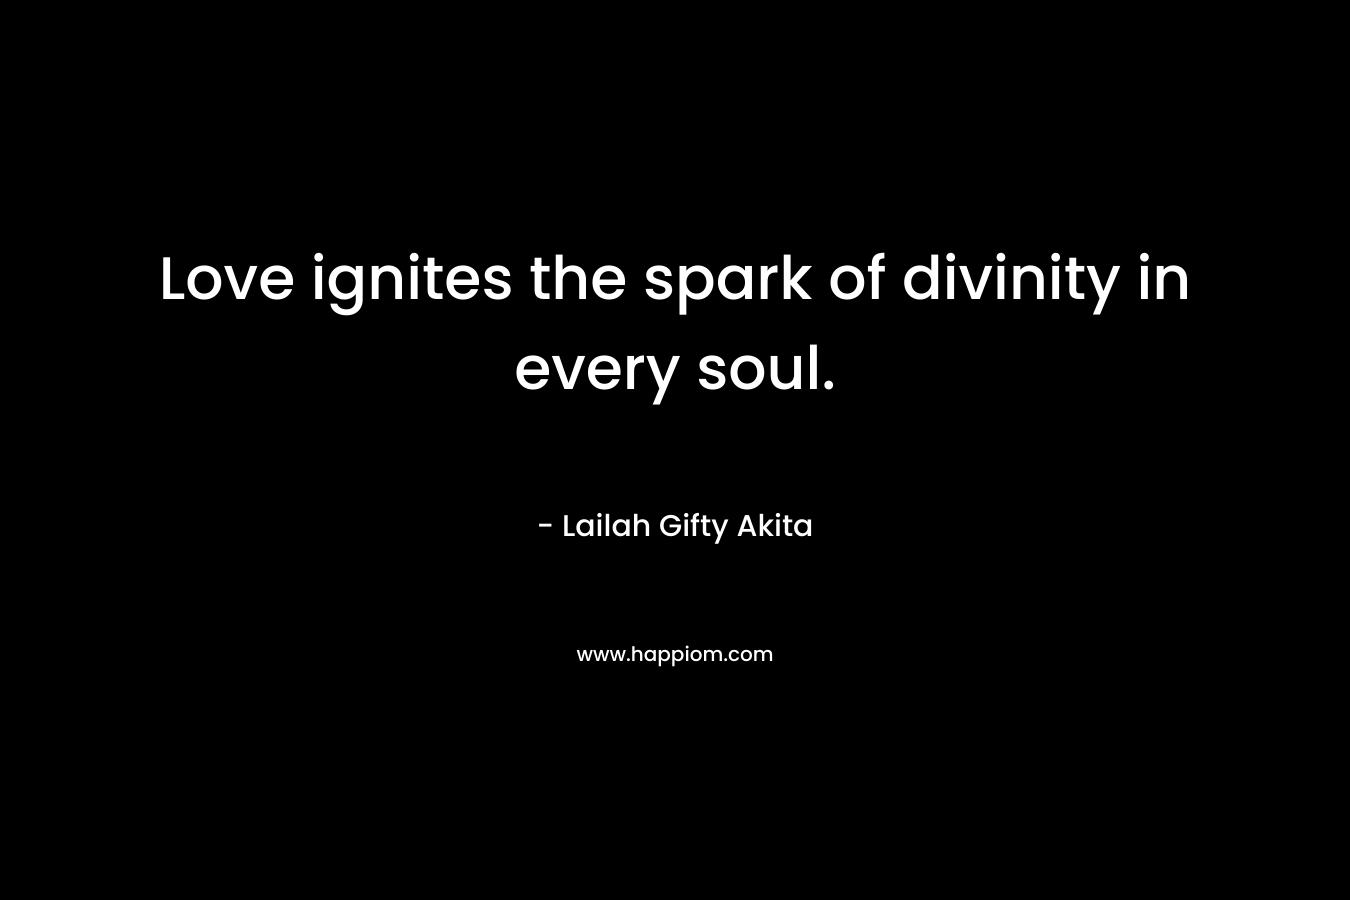 Love ignites the spark of divinity in every soul. – Lailah Gifty Akita